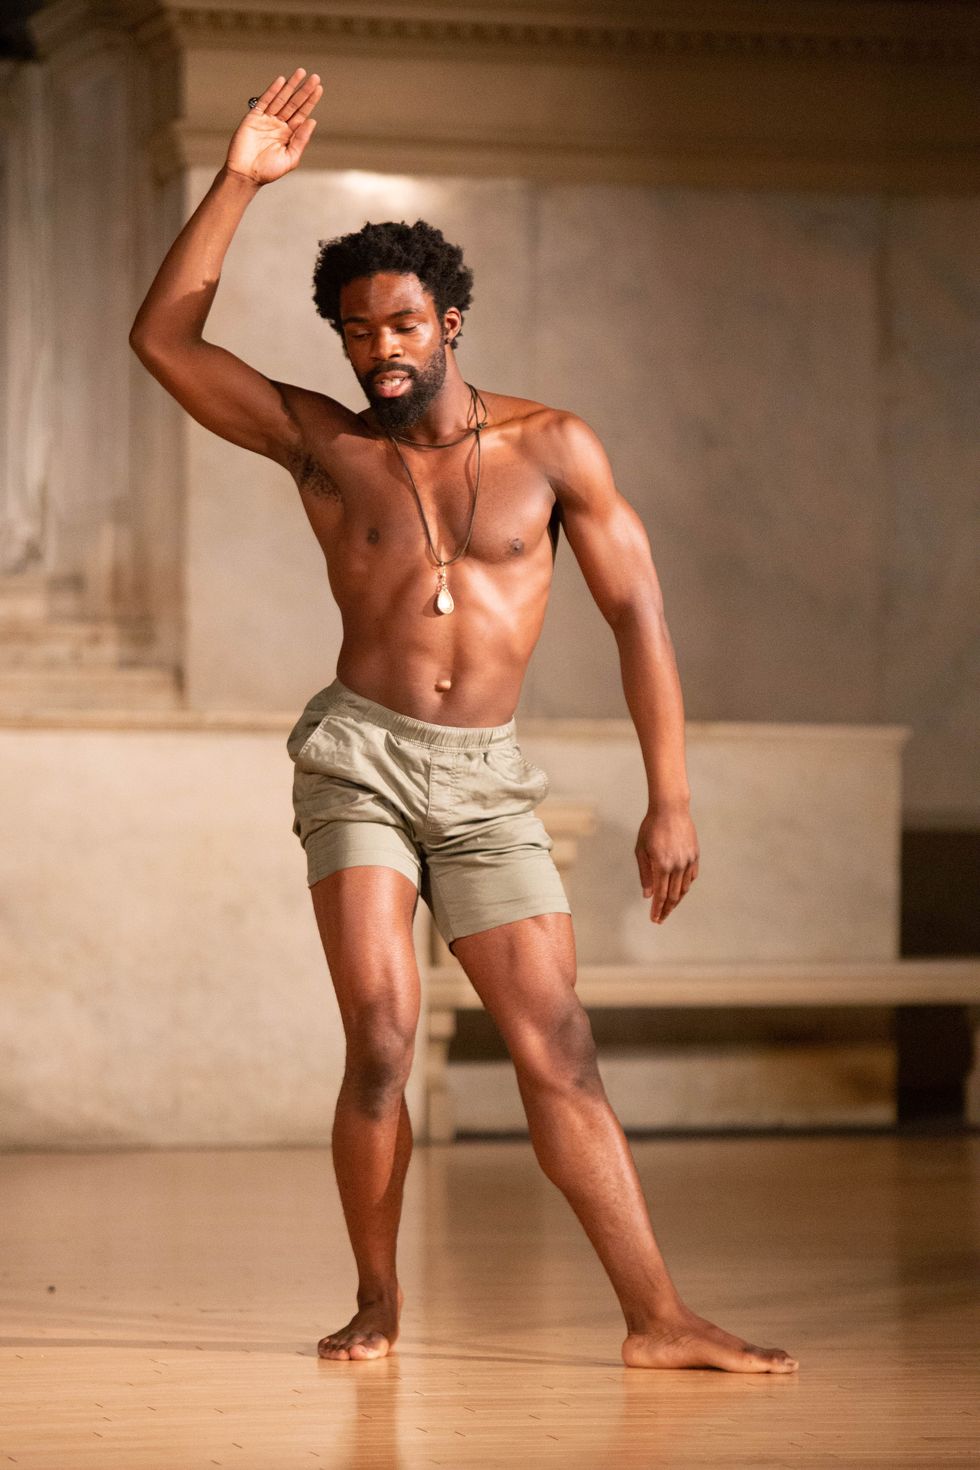 A long-limbed, bare-chested black man stands with one hand raised. He sits into his right hip, left leg extended slightly in front of him but with the foot flat on the floor. His gaze is downcast as his right arm, bent at the elbow, rises alongside his head.